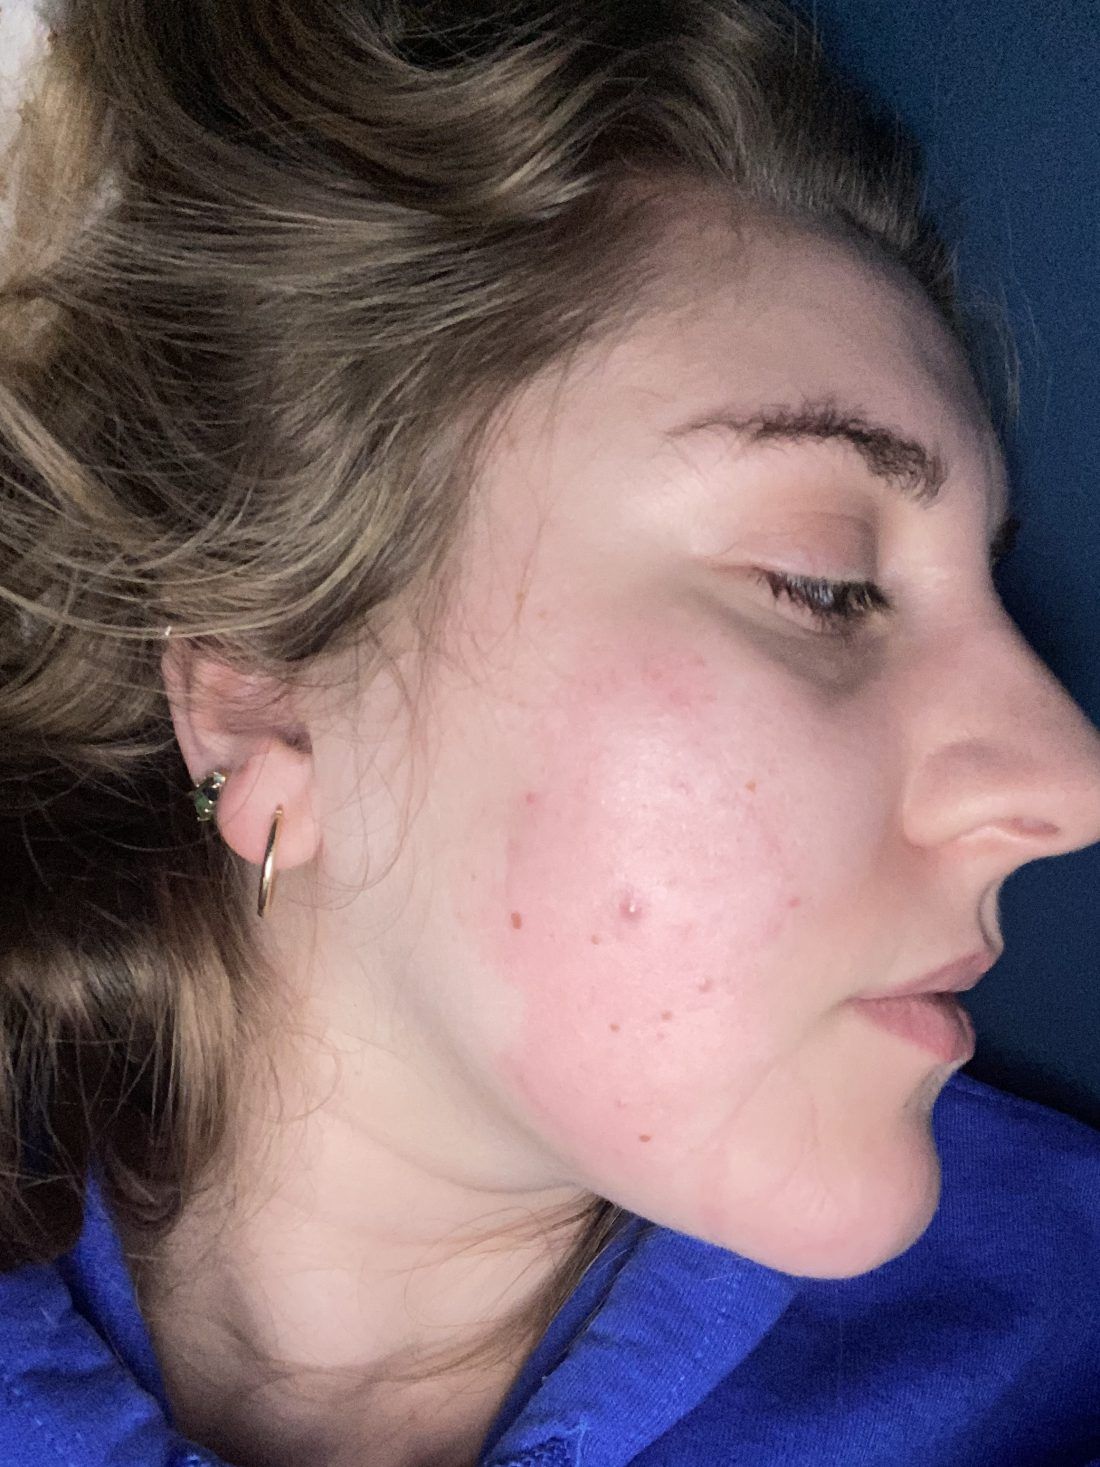 Bandages for acne? Experts weigh in on viral TikTok hack - ABC News